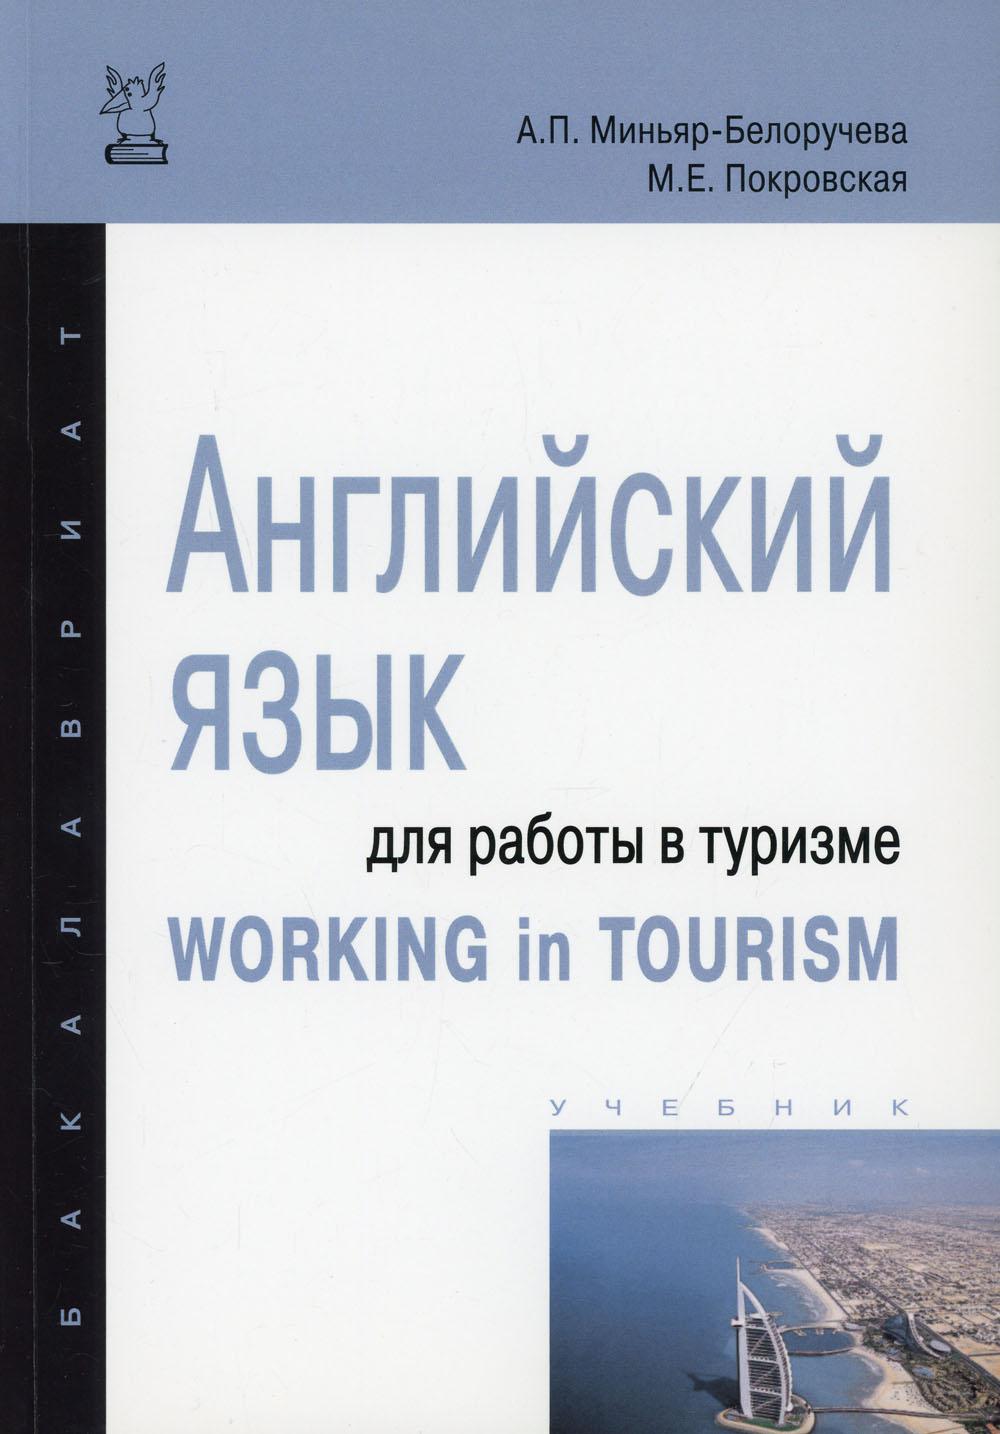       = WORKING IN TOURISM, .2